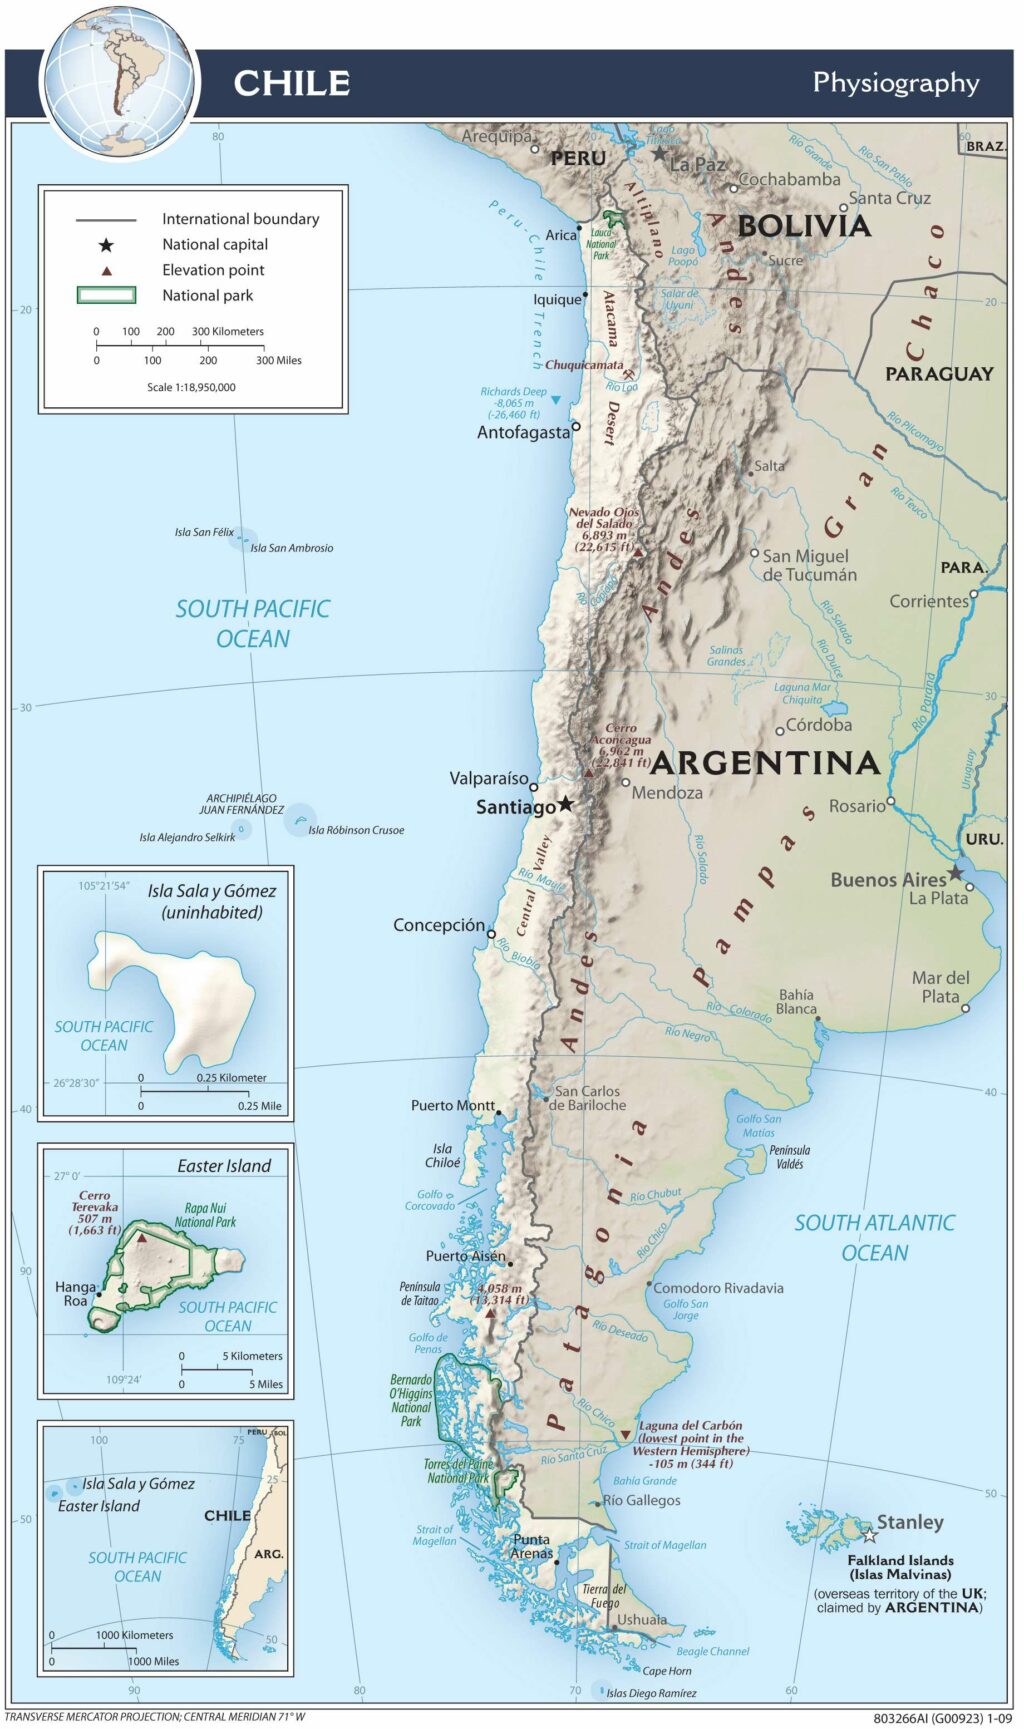 Chile physiography map.